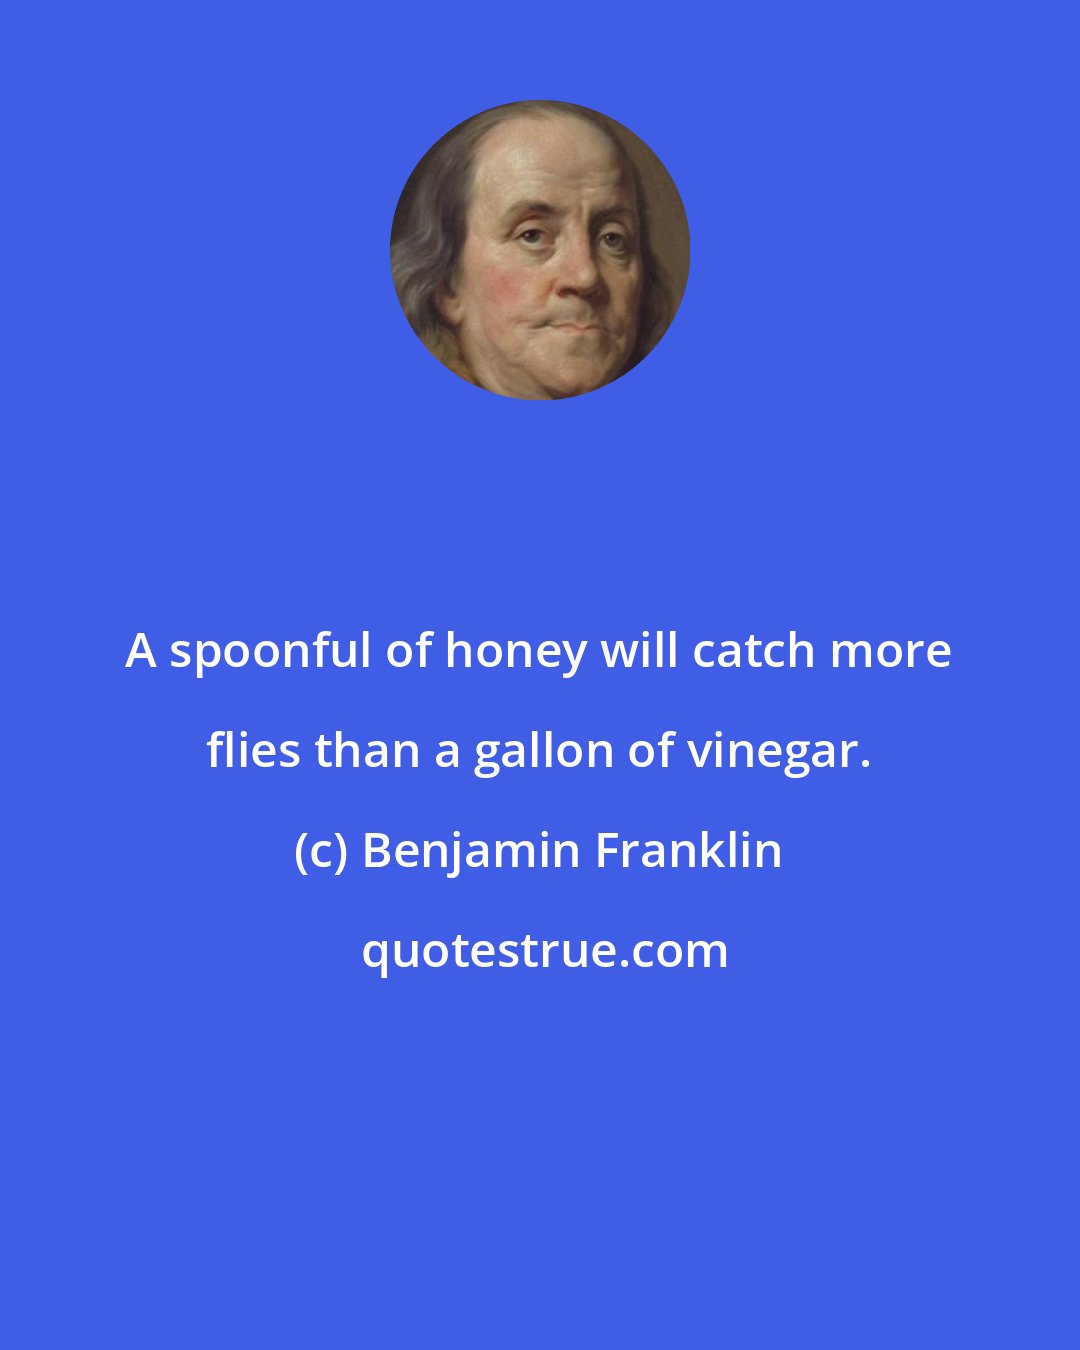 Benjamin Franklin: A spoonful of honey will catch more flies than a gallon of vinegar.